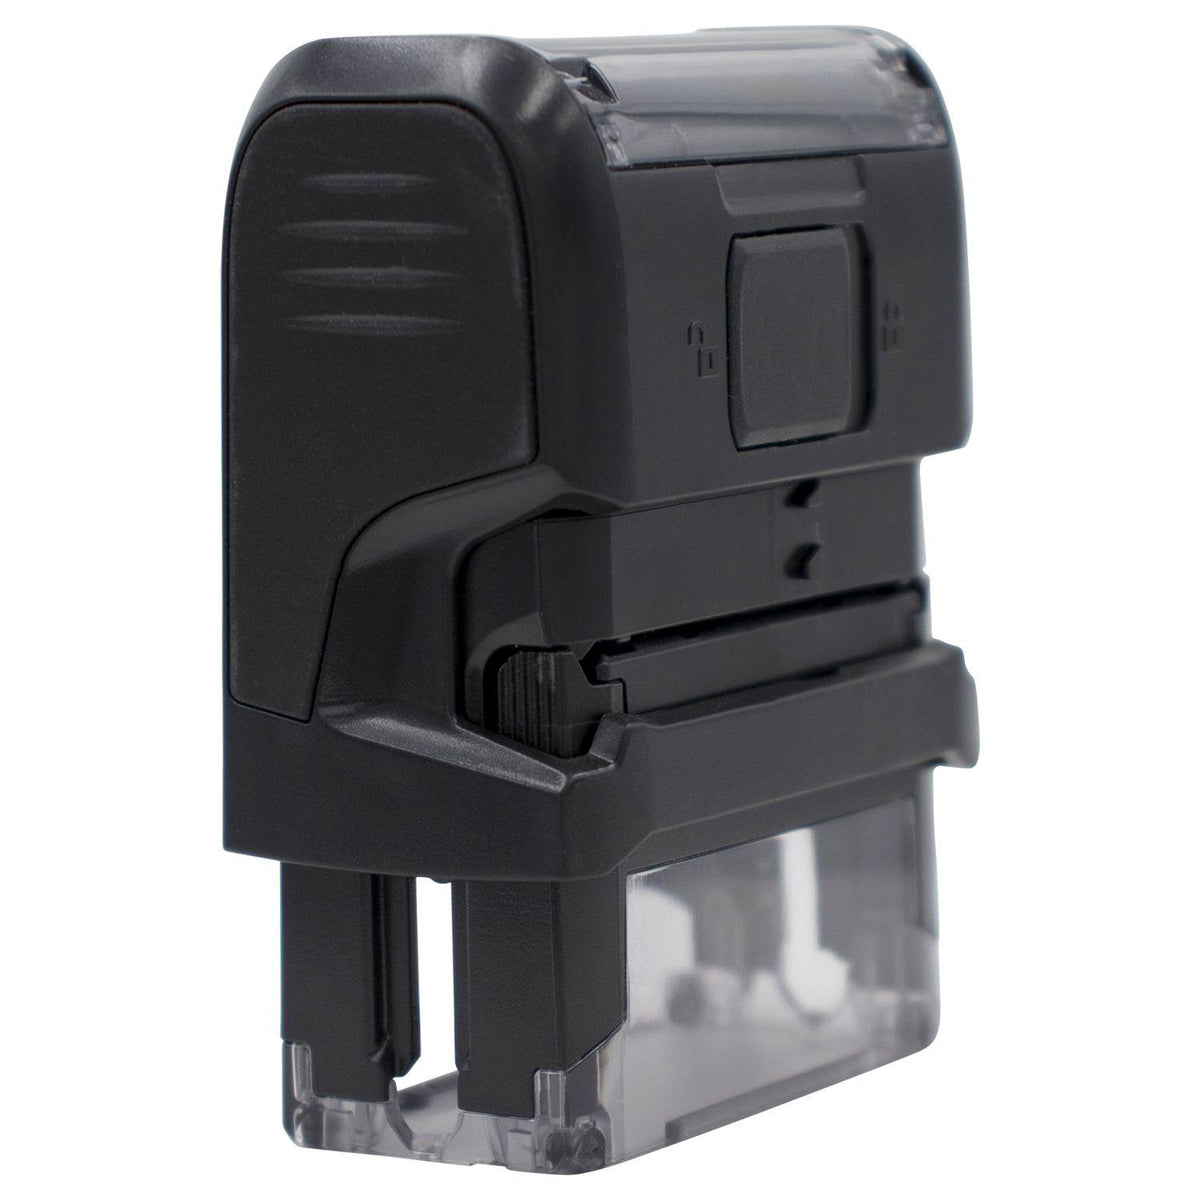 Self Inking Important Stamp - Engineer Seal Stamps - Brand_Trodat, Impression Size_Small, Stamp Type_Self-Inking Stamp, Type of Use_Office